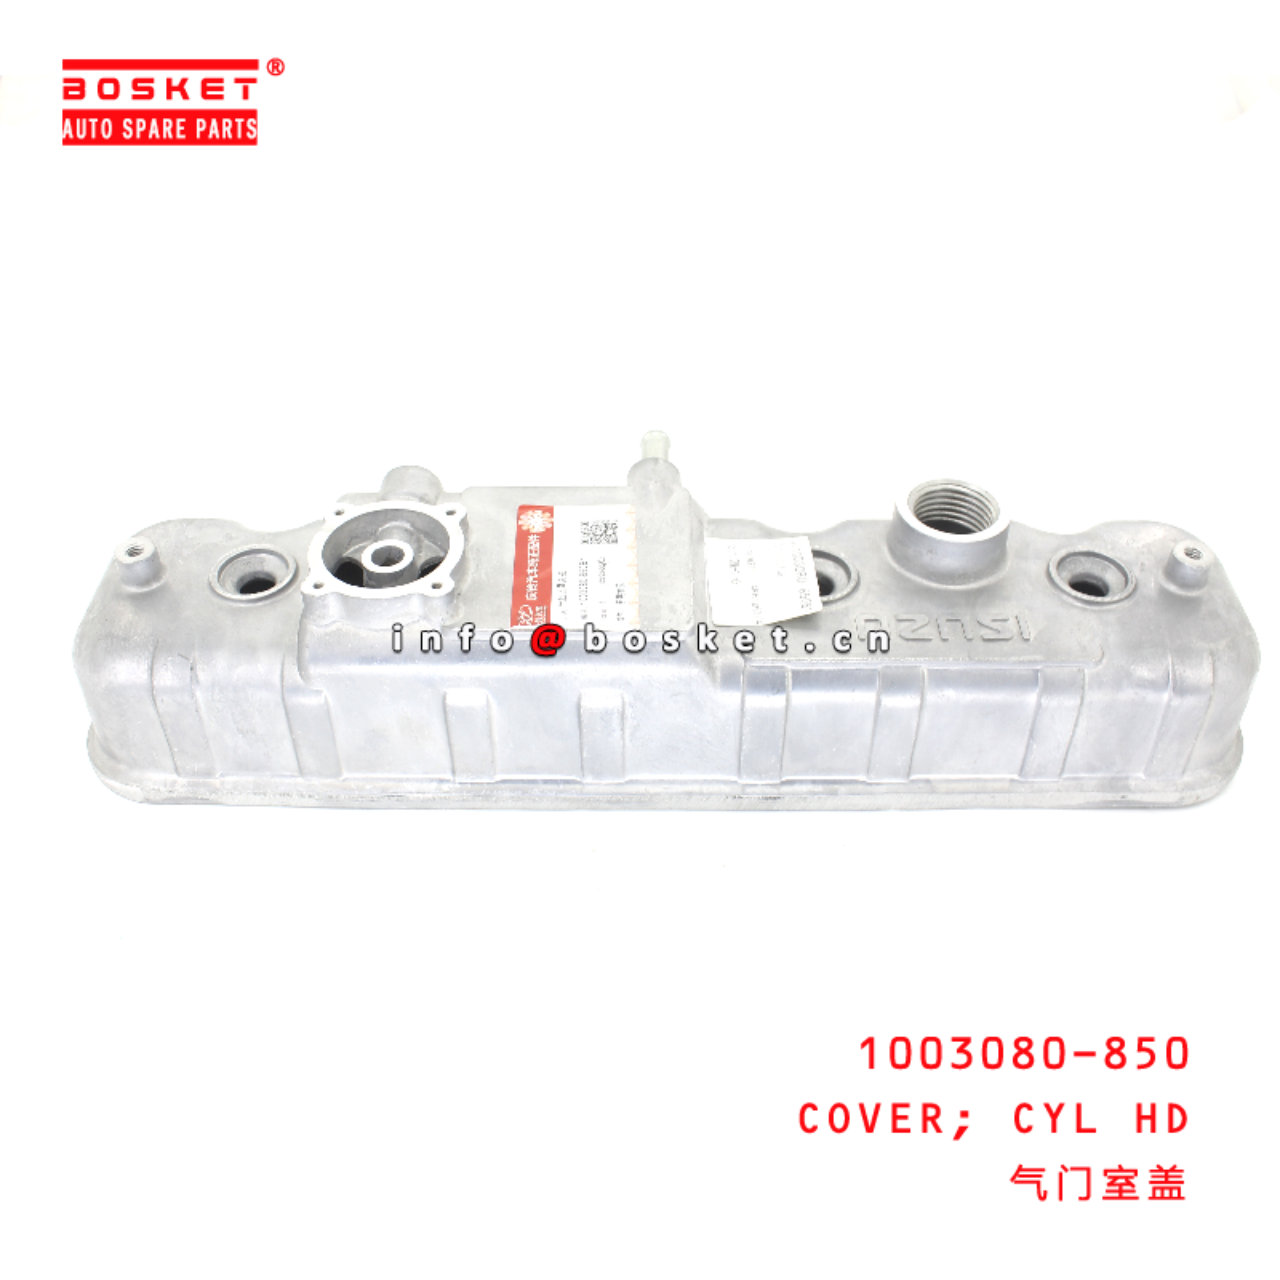 1003080-850 Head To Cover Gasket suitable for ISUZ...